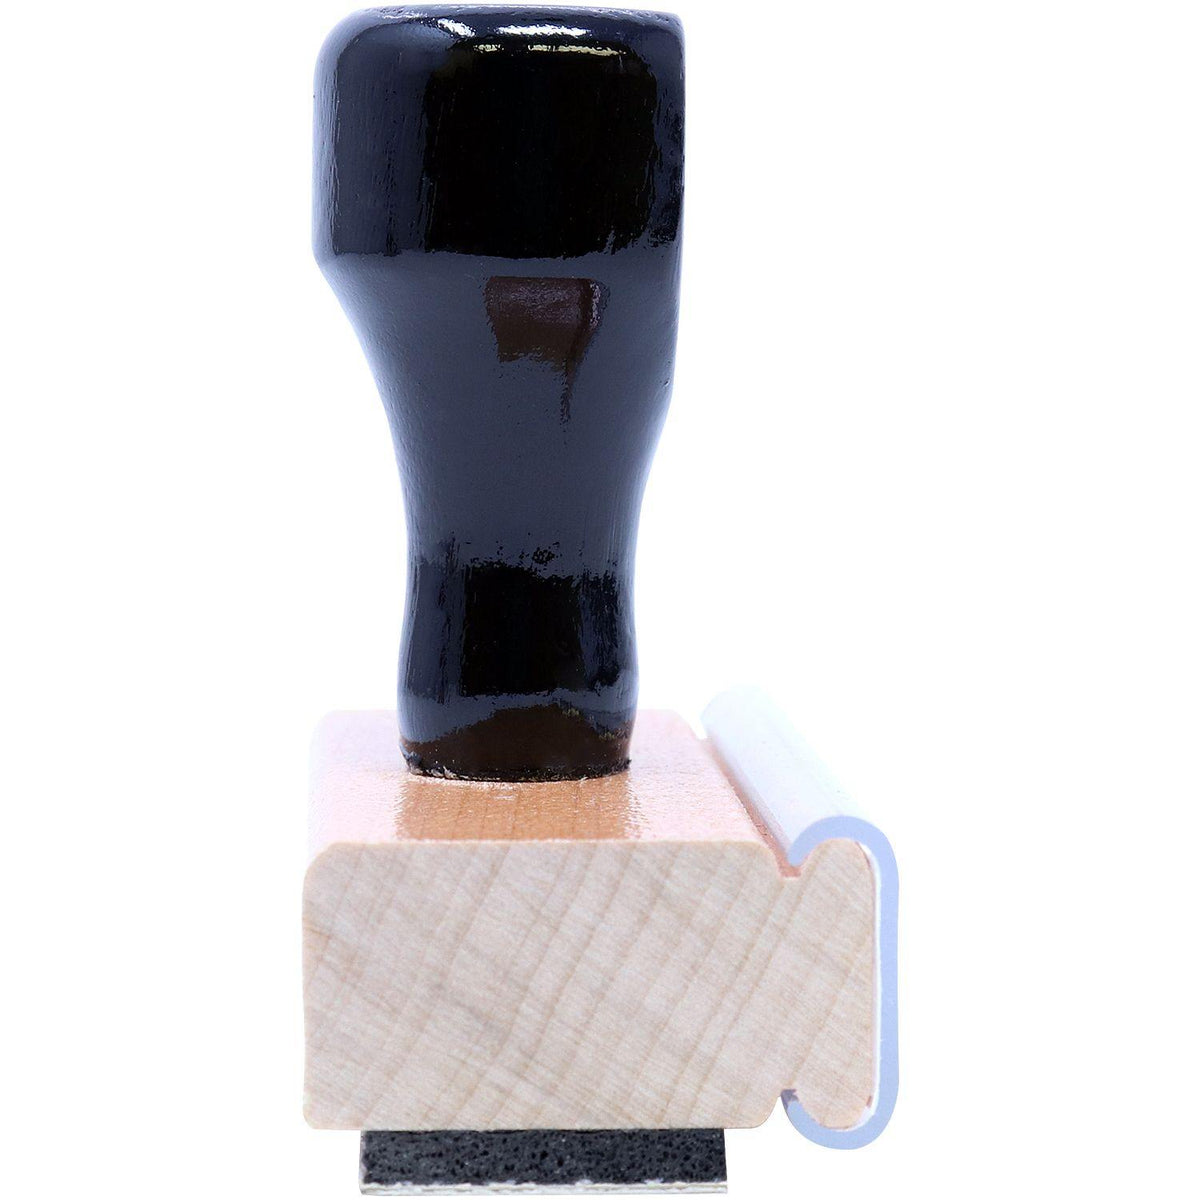 Side View of Wealth Management Rubber Stamp